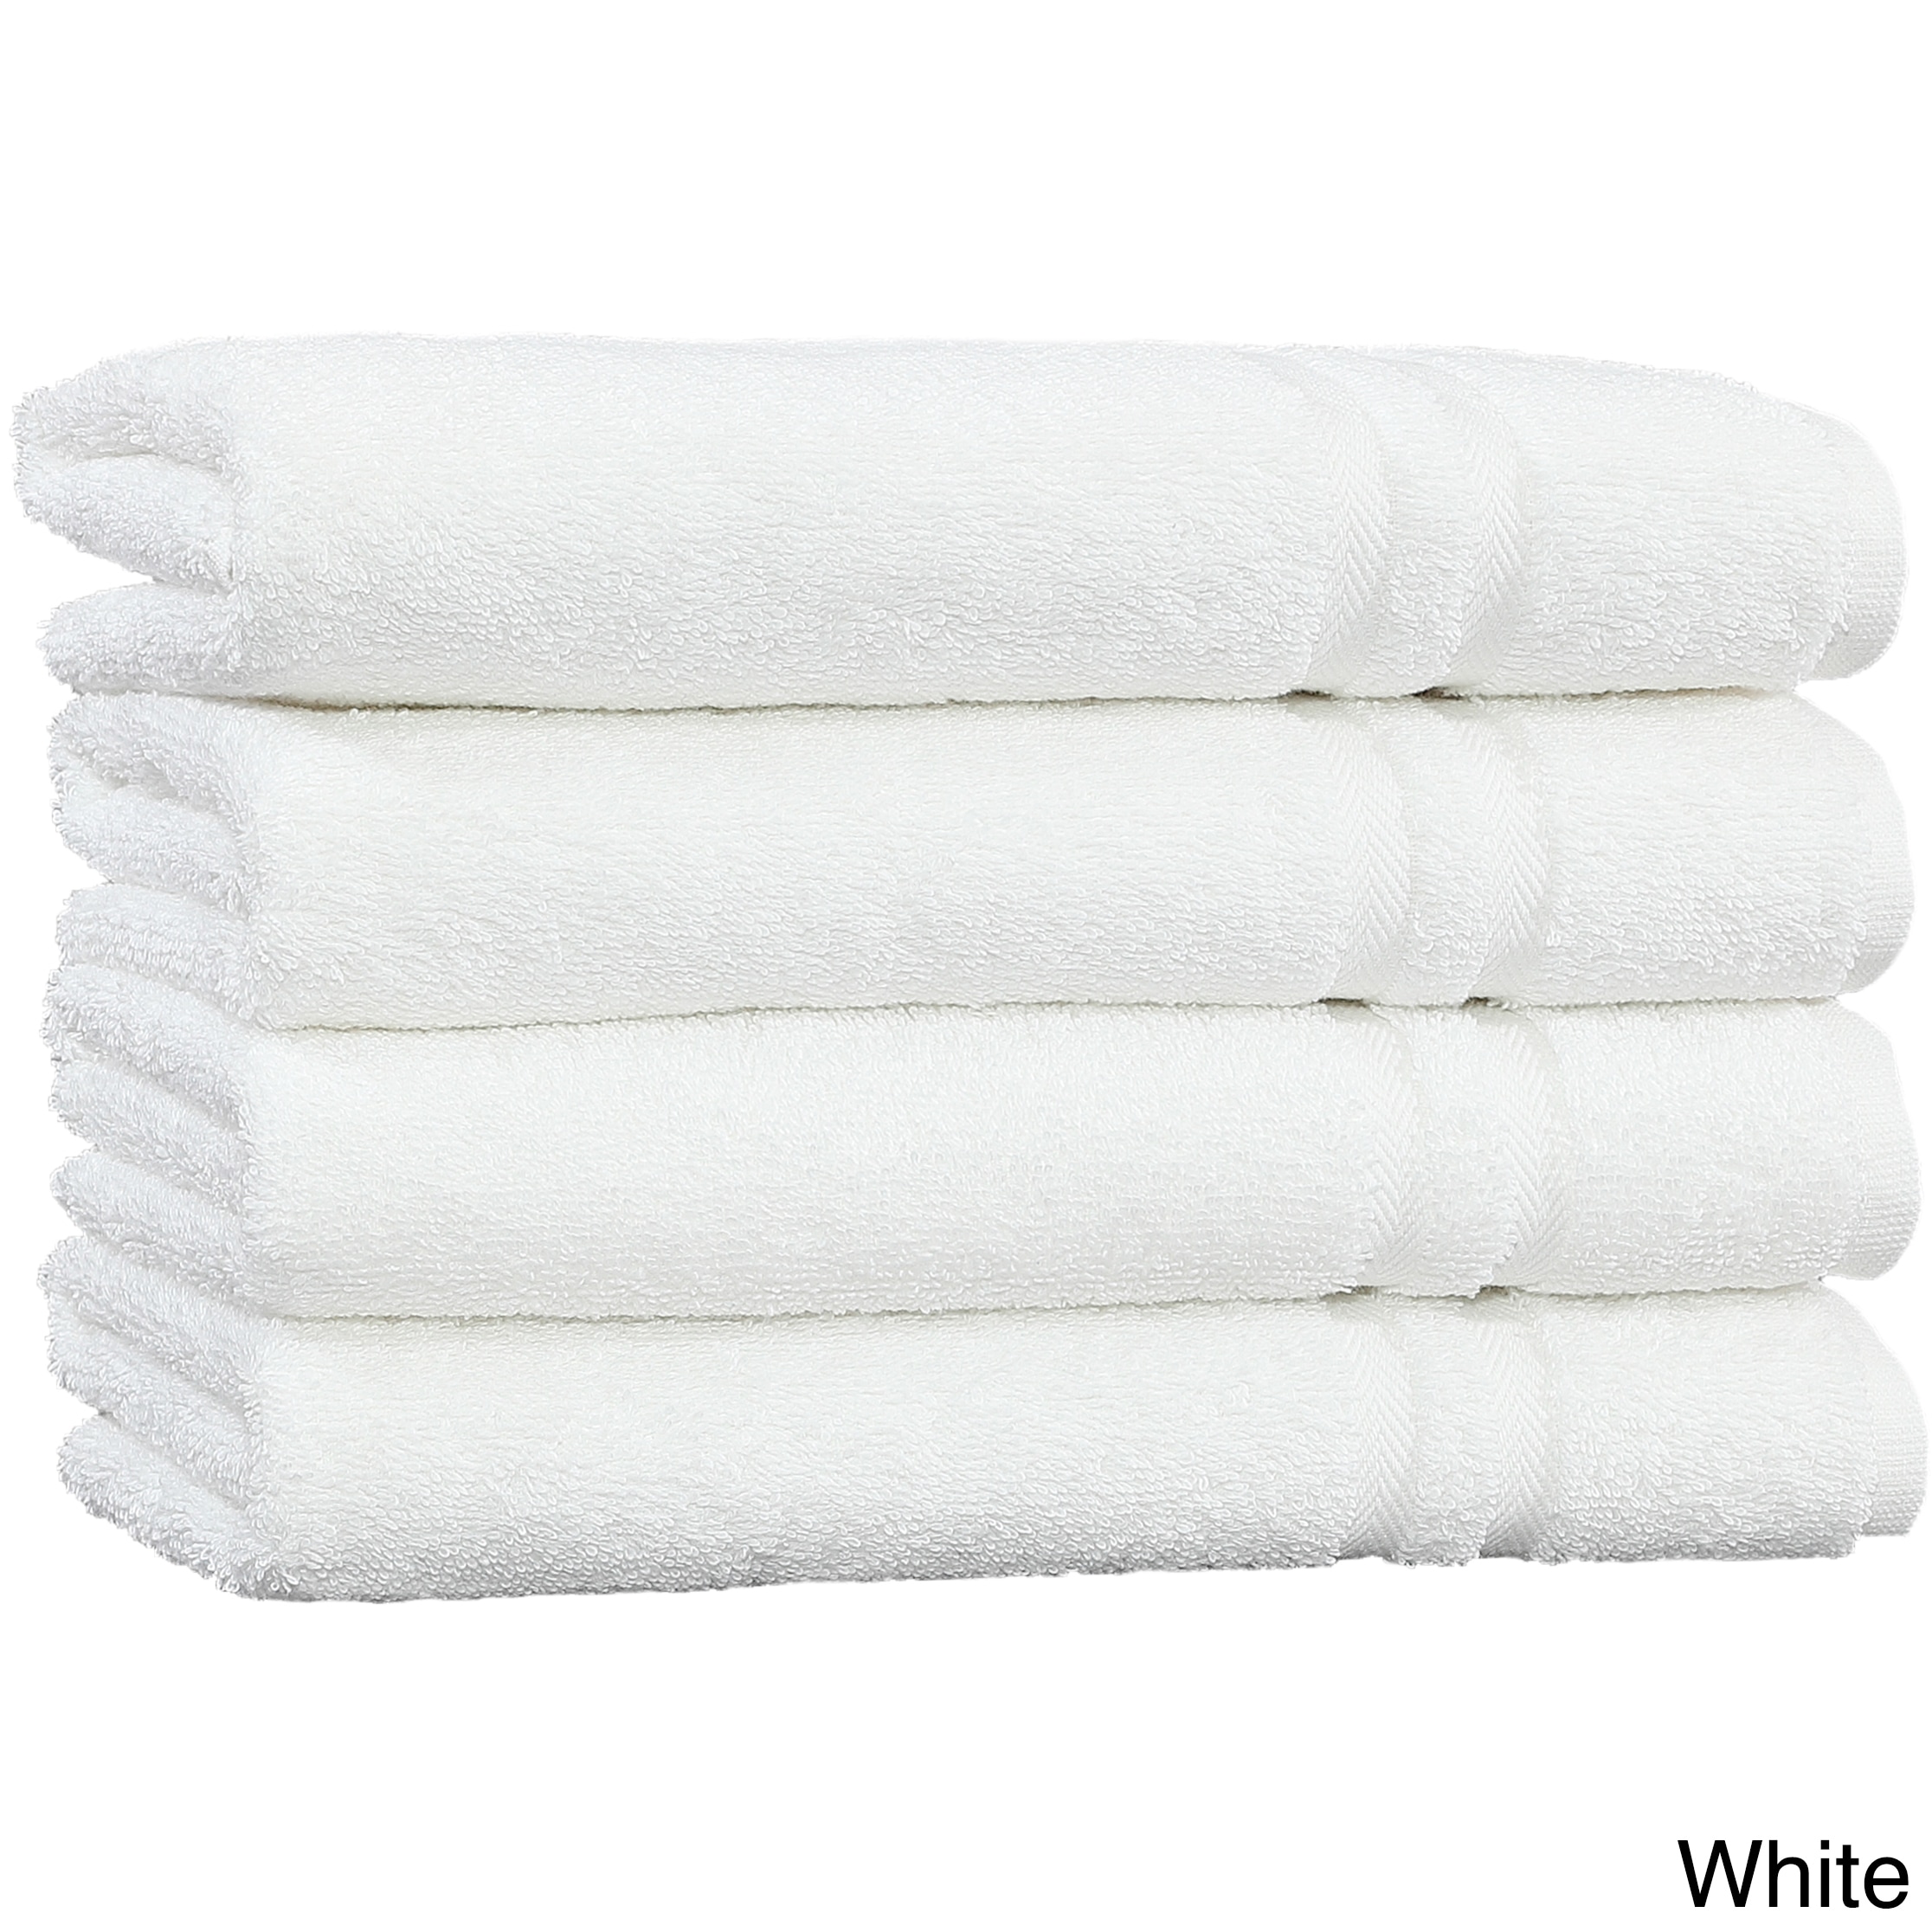 https://ak1.ostkcdn.com/images/products/11090782/Authentic-Hotel-and-Spa-Omni-Turkish-Cotton-Terry-Hand-Towels-Set-of-4-9faf491a-4374-427a-98a7-d1e6519c7a58.jpg